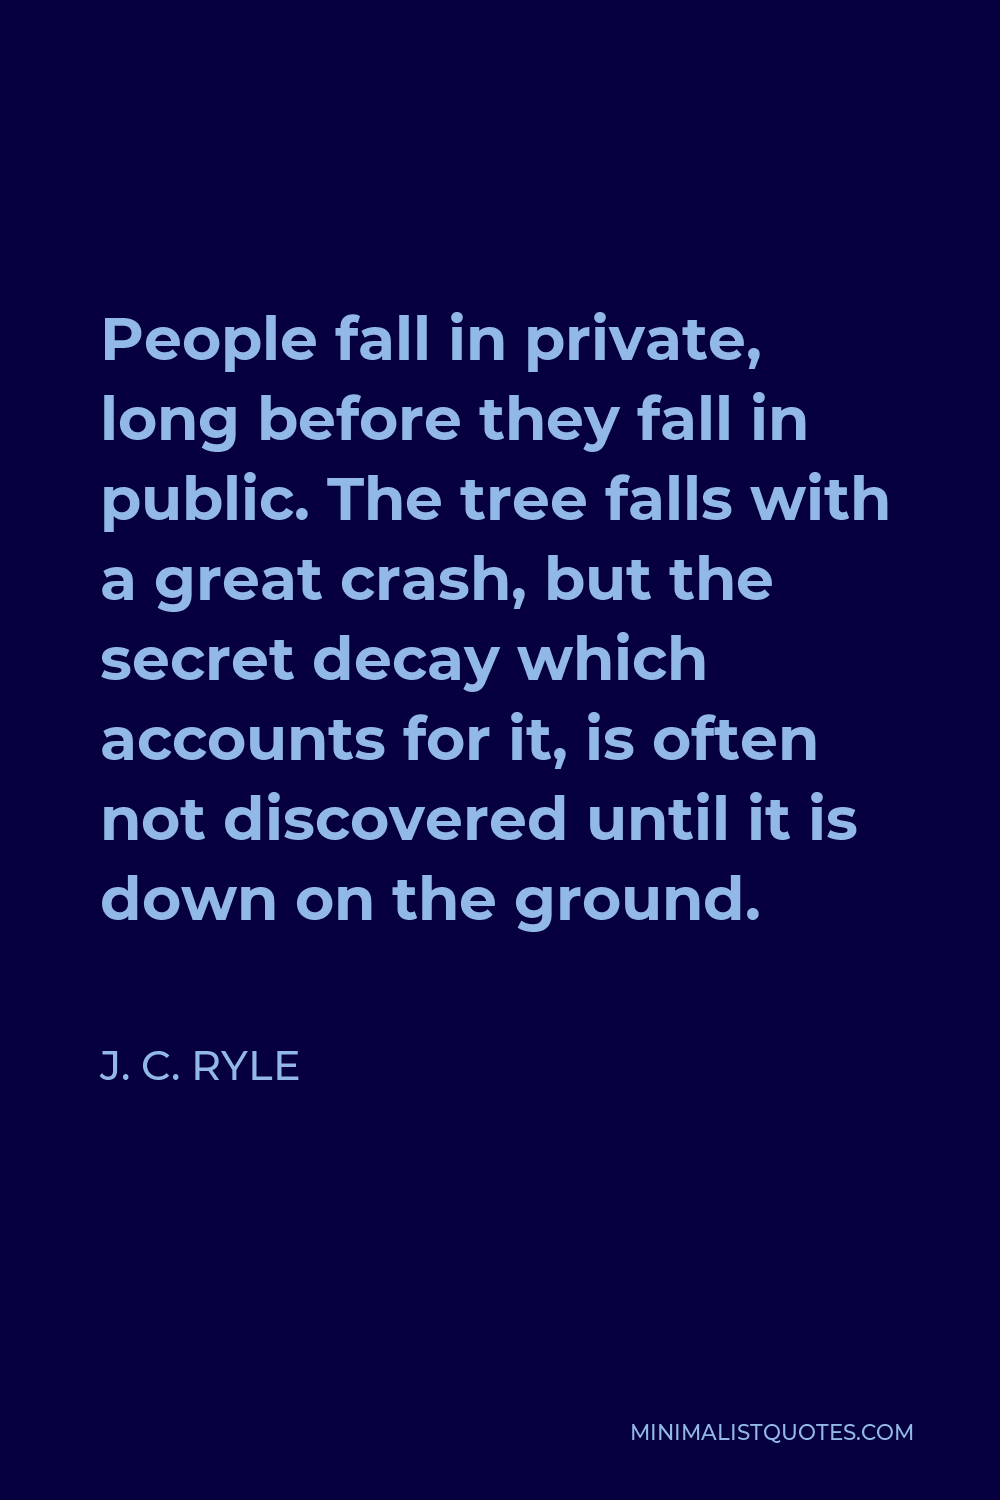 J. C. Ryle Quote - People fall in private, long before they fall in public. The tree falls with a great crash, but the secret decay which accounts for it, is often not discovered until it is down on the ground.